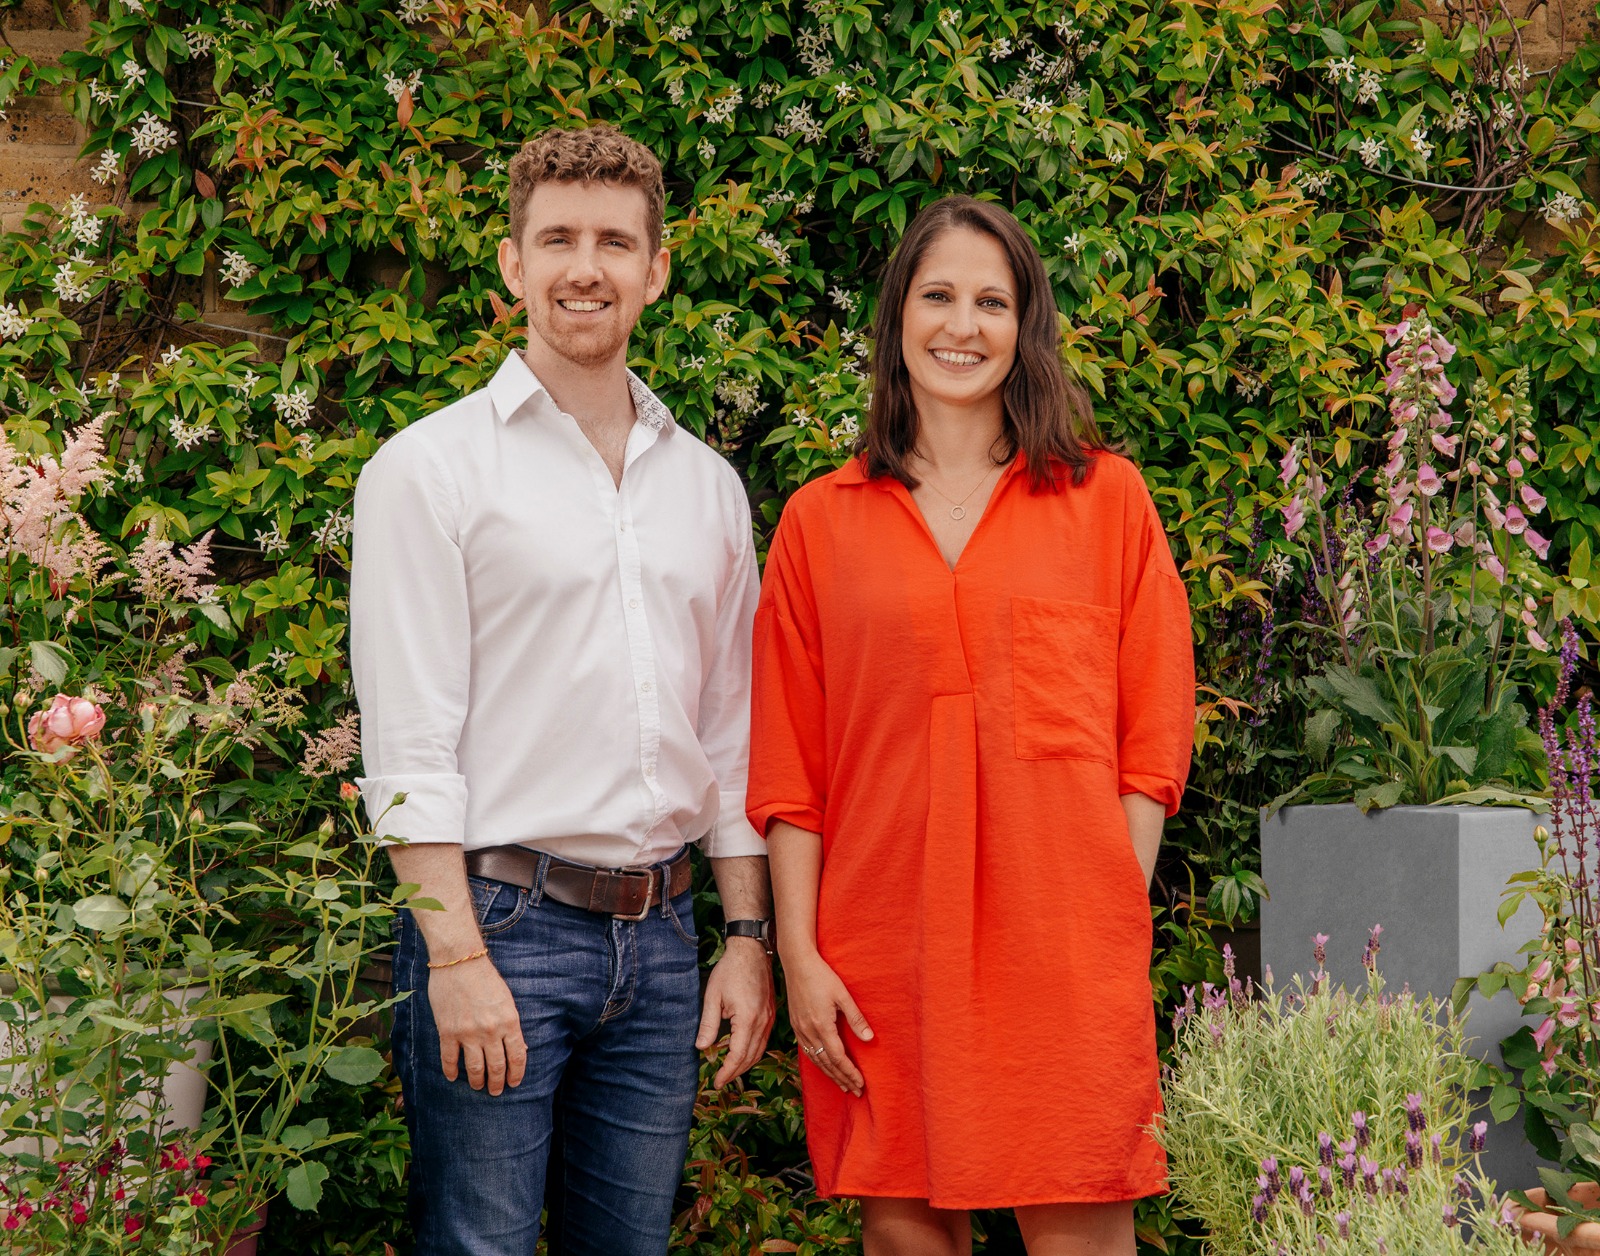 FORMER FARFETCH TEAM LAUNCHES SPROUTL, THE DESTINATION FOR NEW GENERATION OF GARDENERS, AND RAISES $9M LED BY INDEX VENTURES